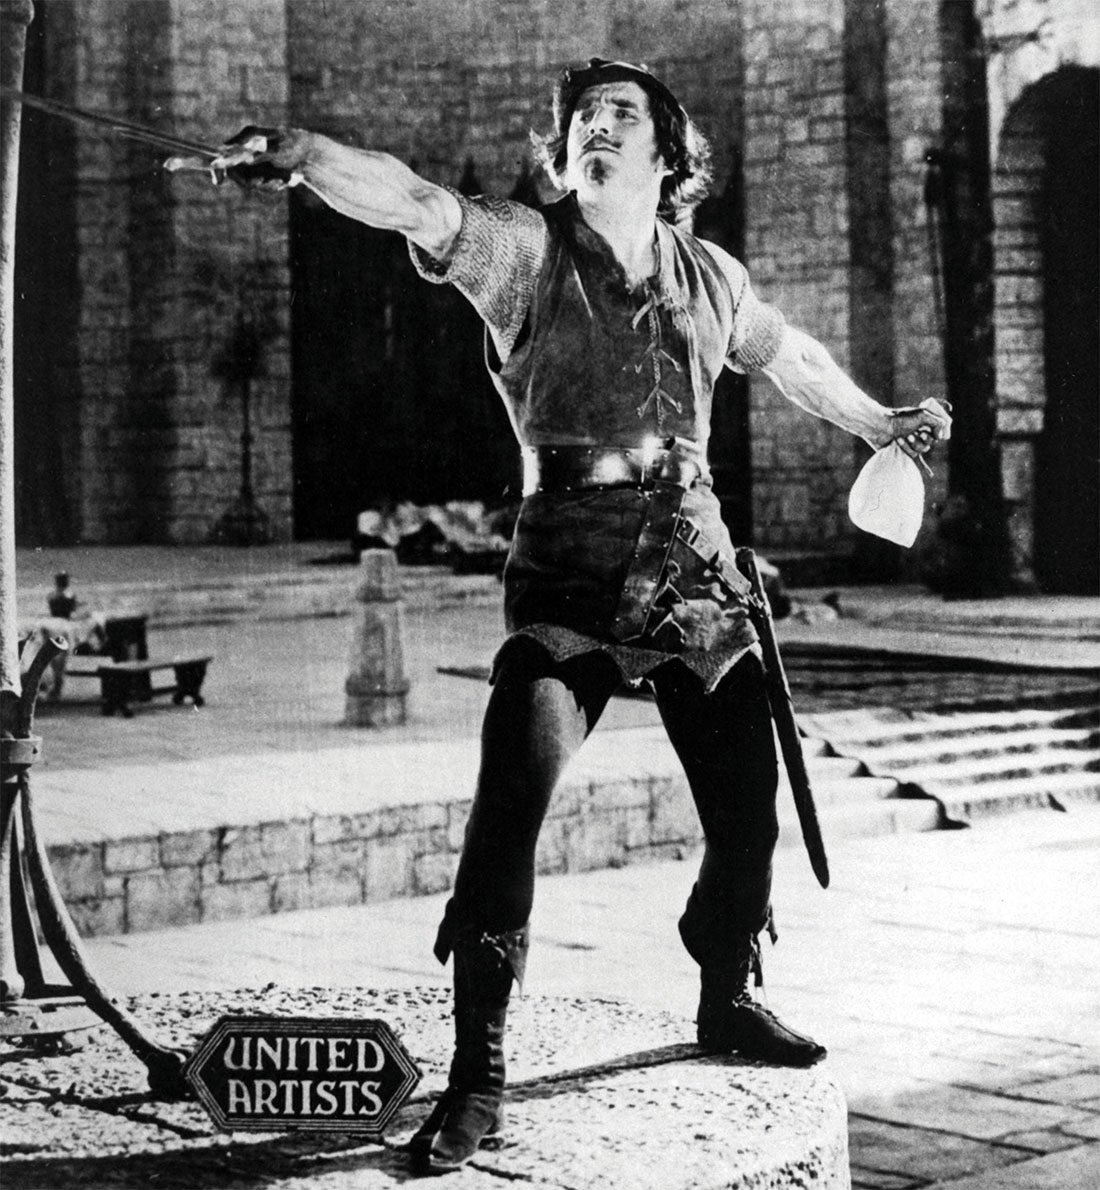 Buckled and swashed: Douglas Fairbanks as Robin Hood, 1922.